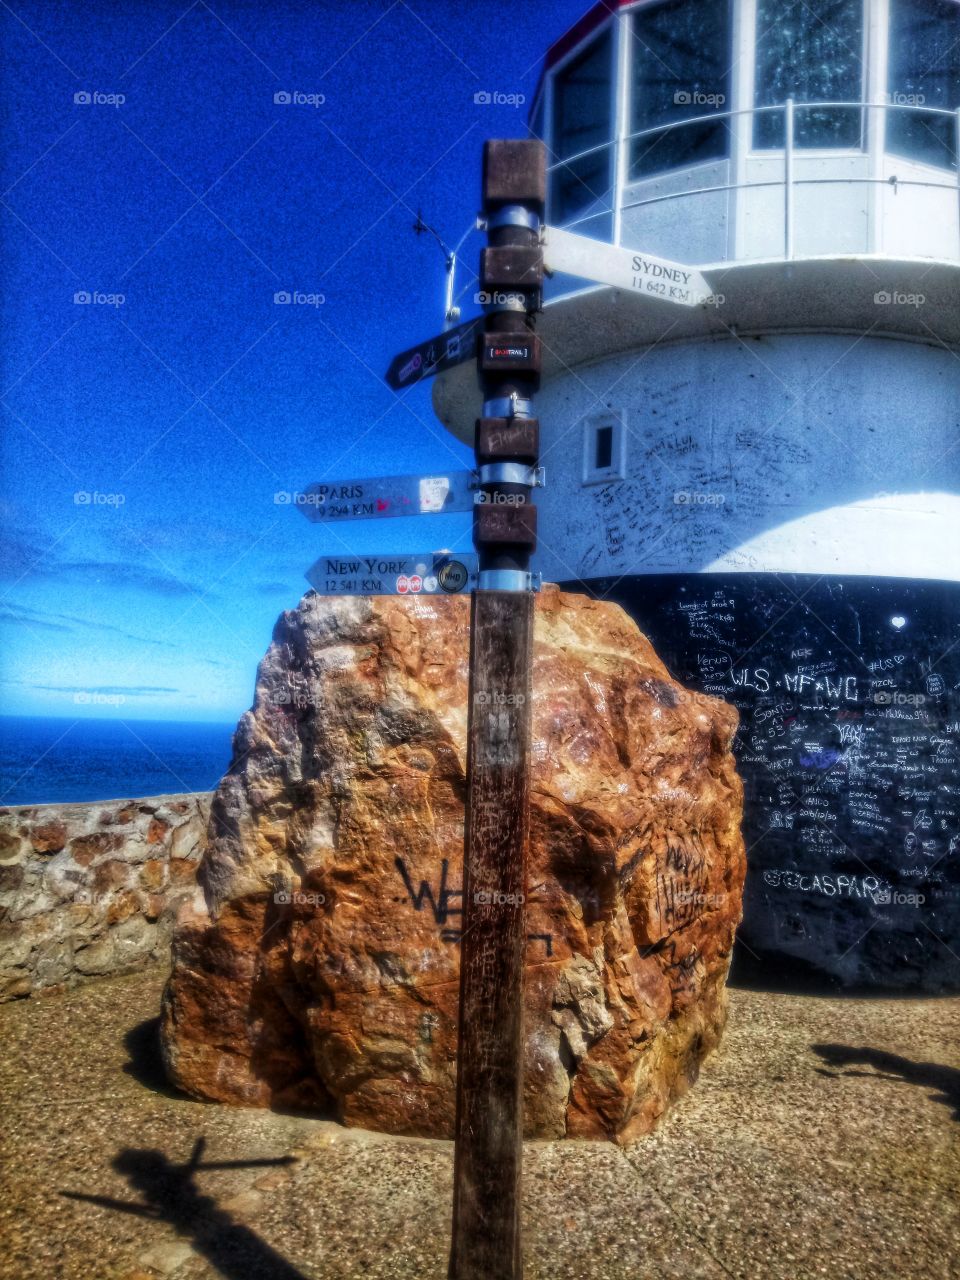 Cape point